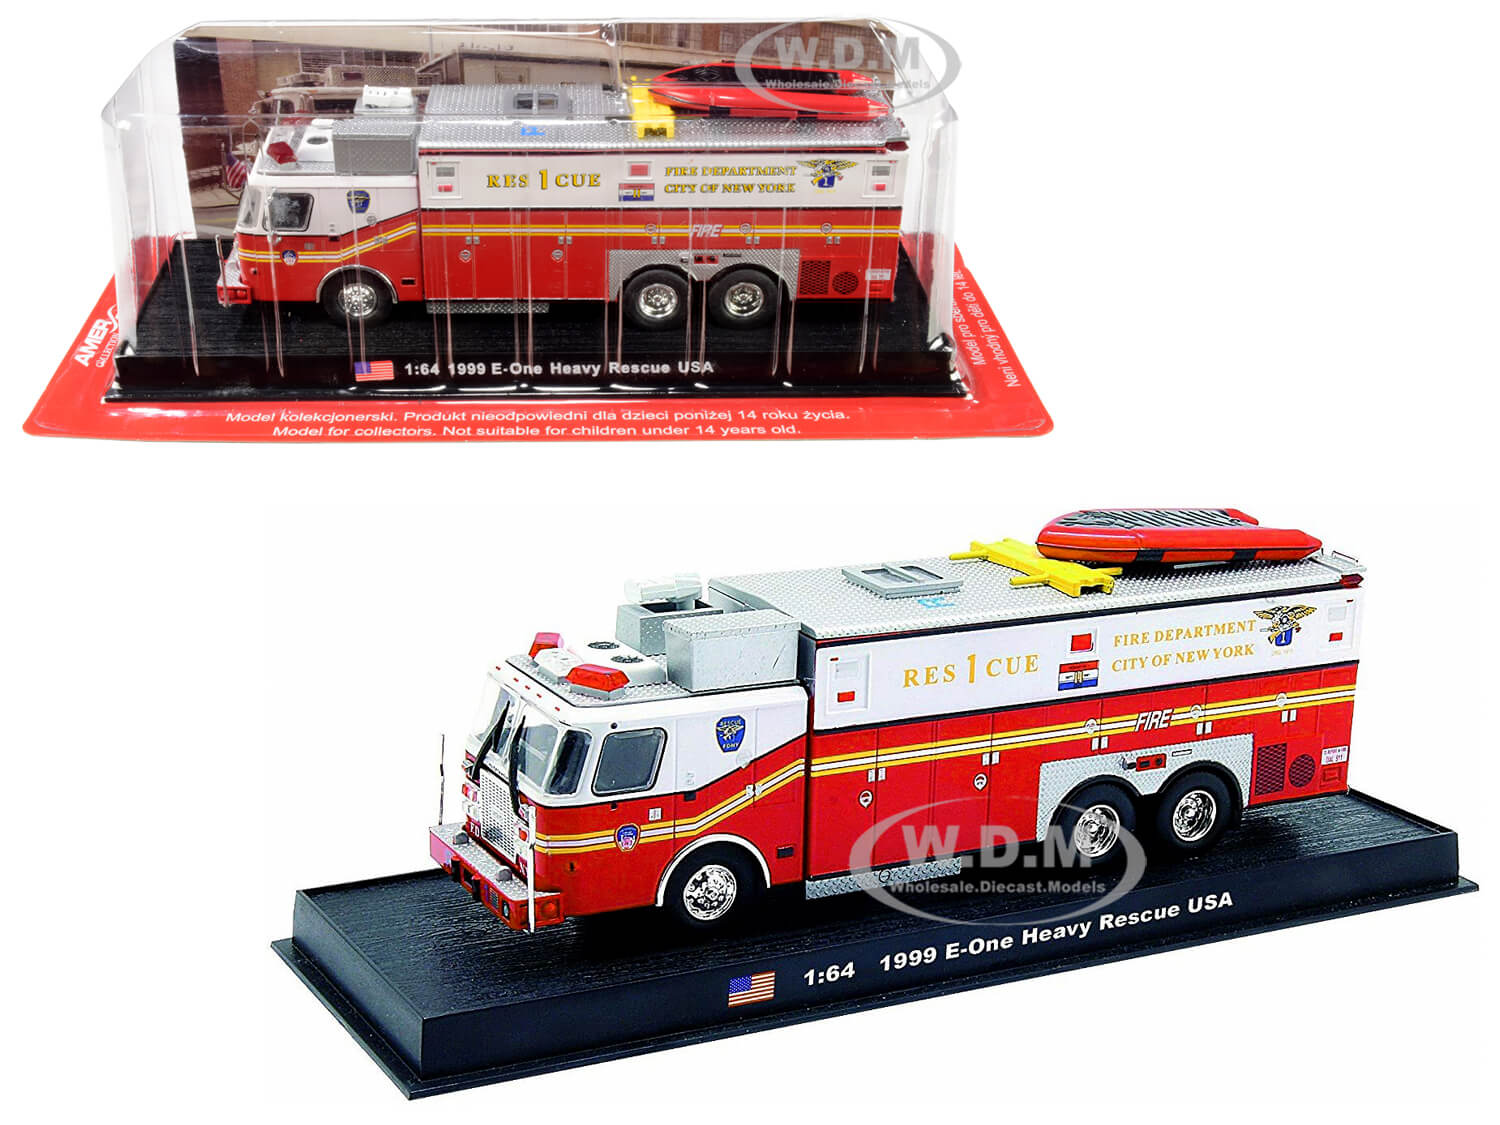 1999 E-One Heavy Rescue Fire Engine "Fire Department City of New York" (FDNY) 1/64 Diecast Model by Amercom